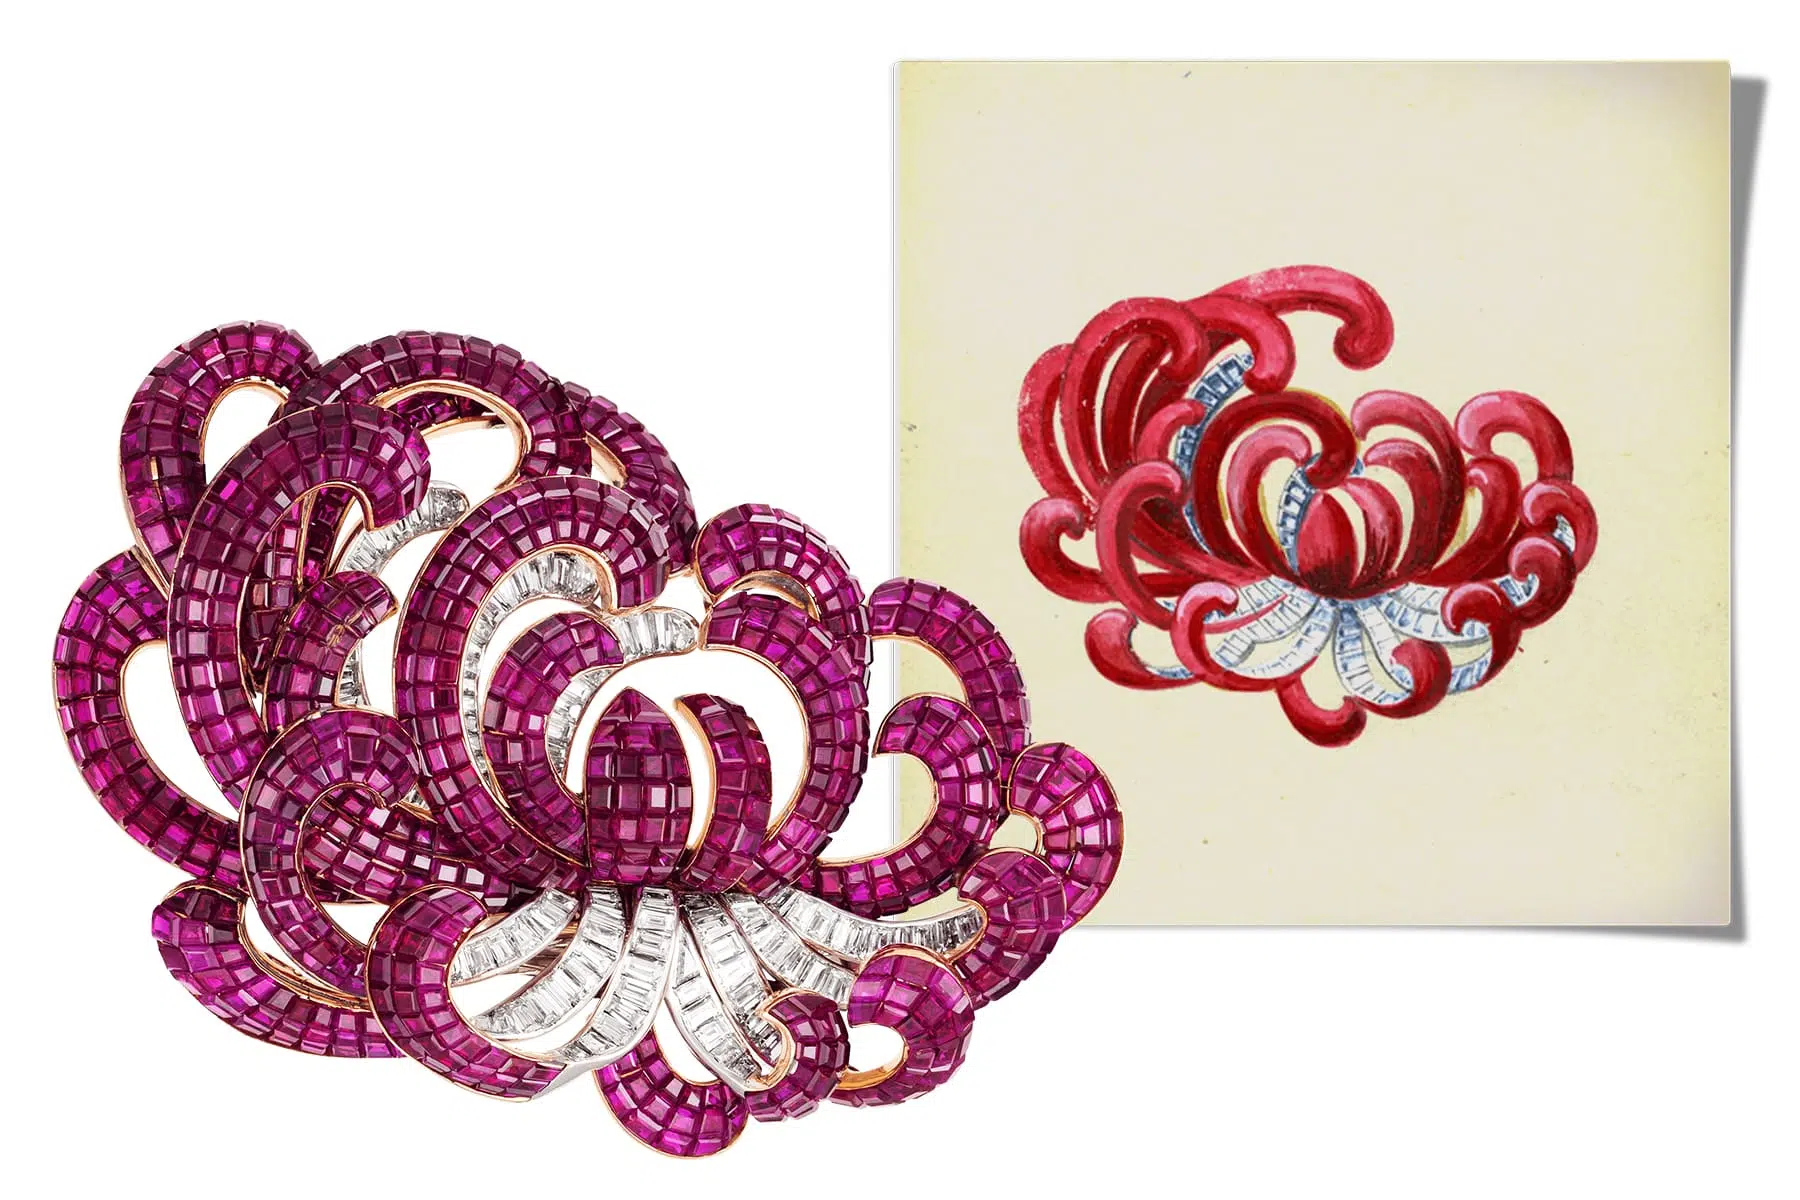 This Van Cleef & Arpels Mystery Set chrysanthemum brooch, shown with a sketch for its design, was made by the house in 1937.